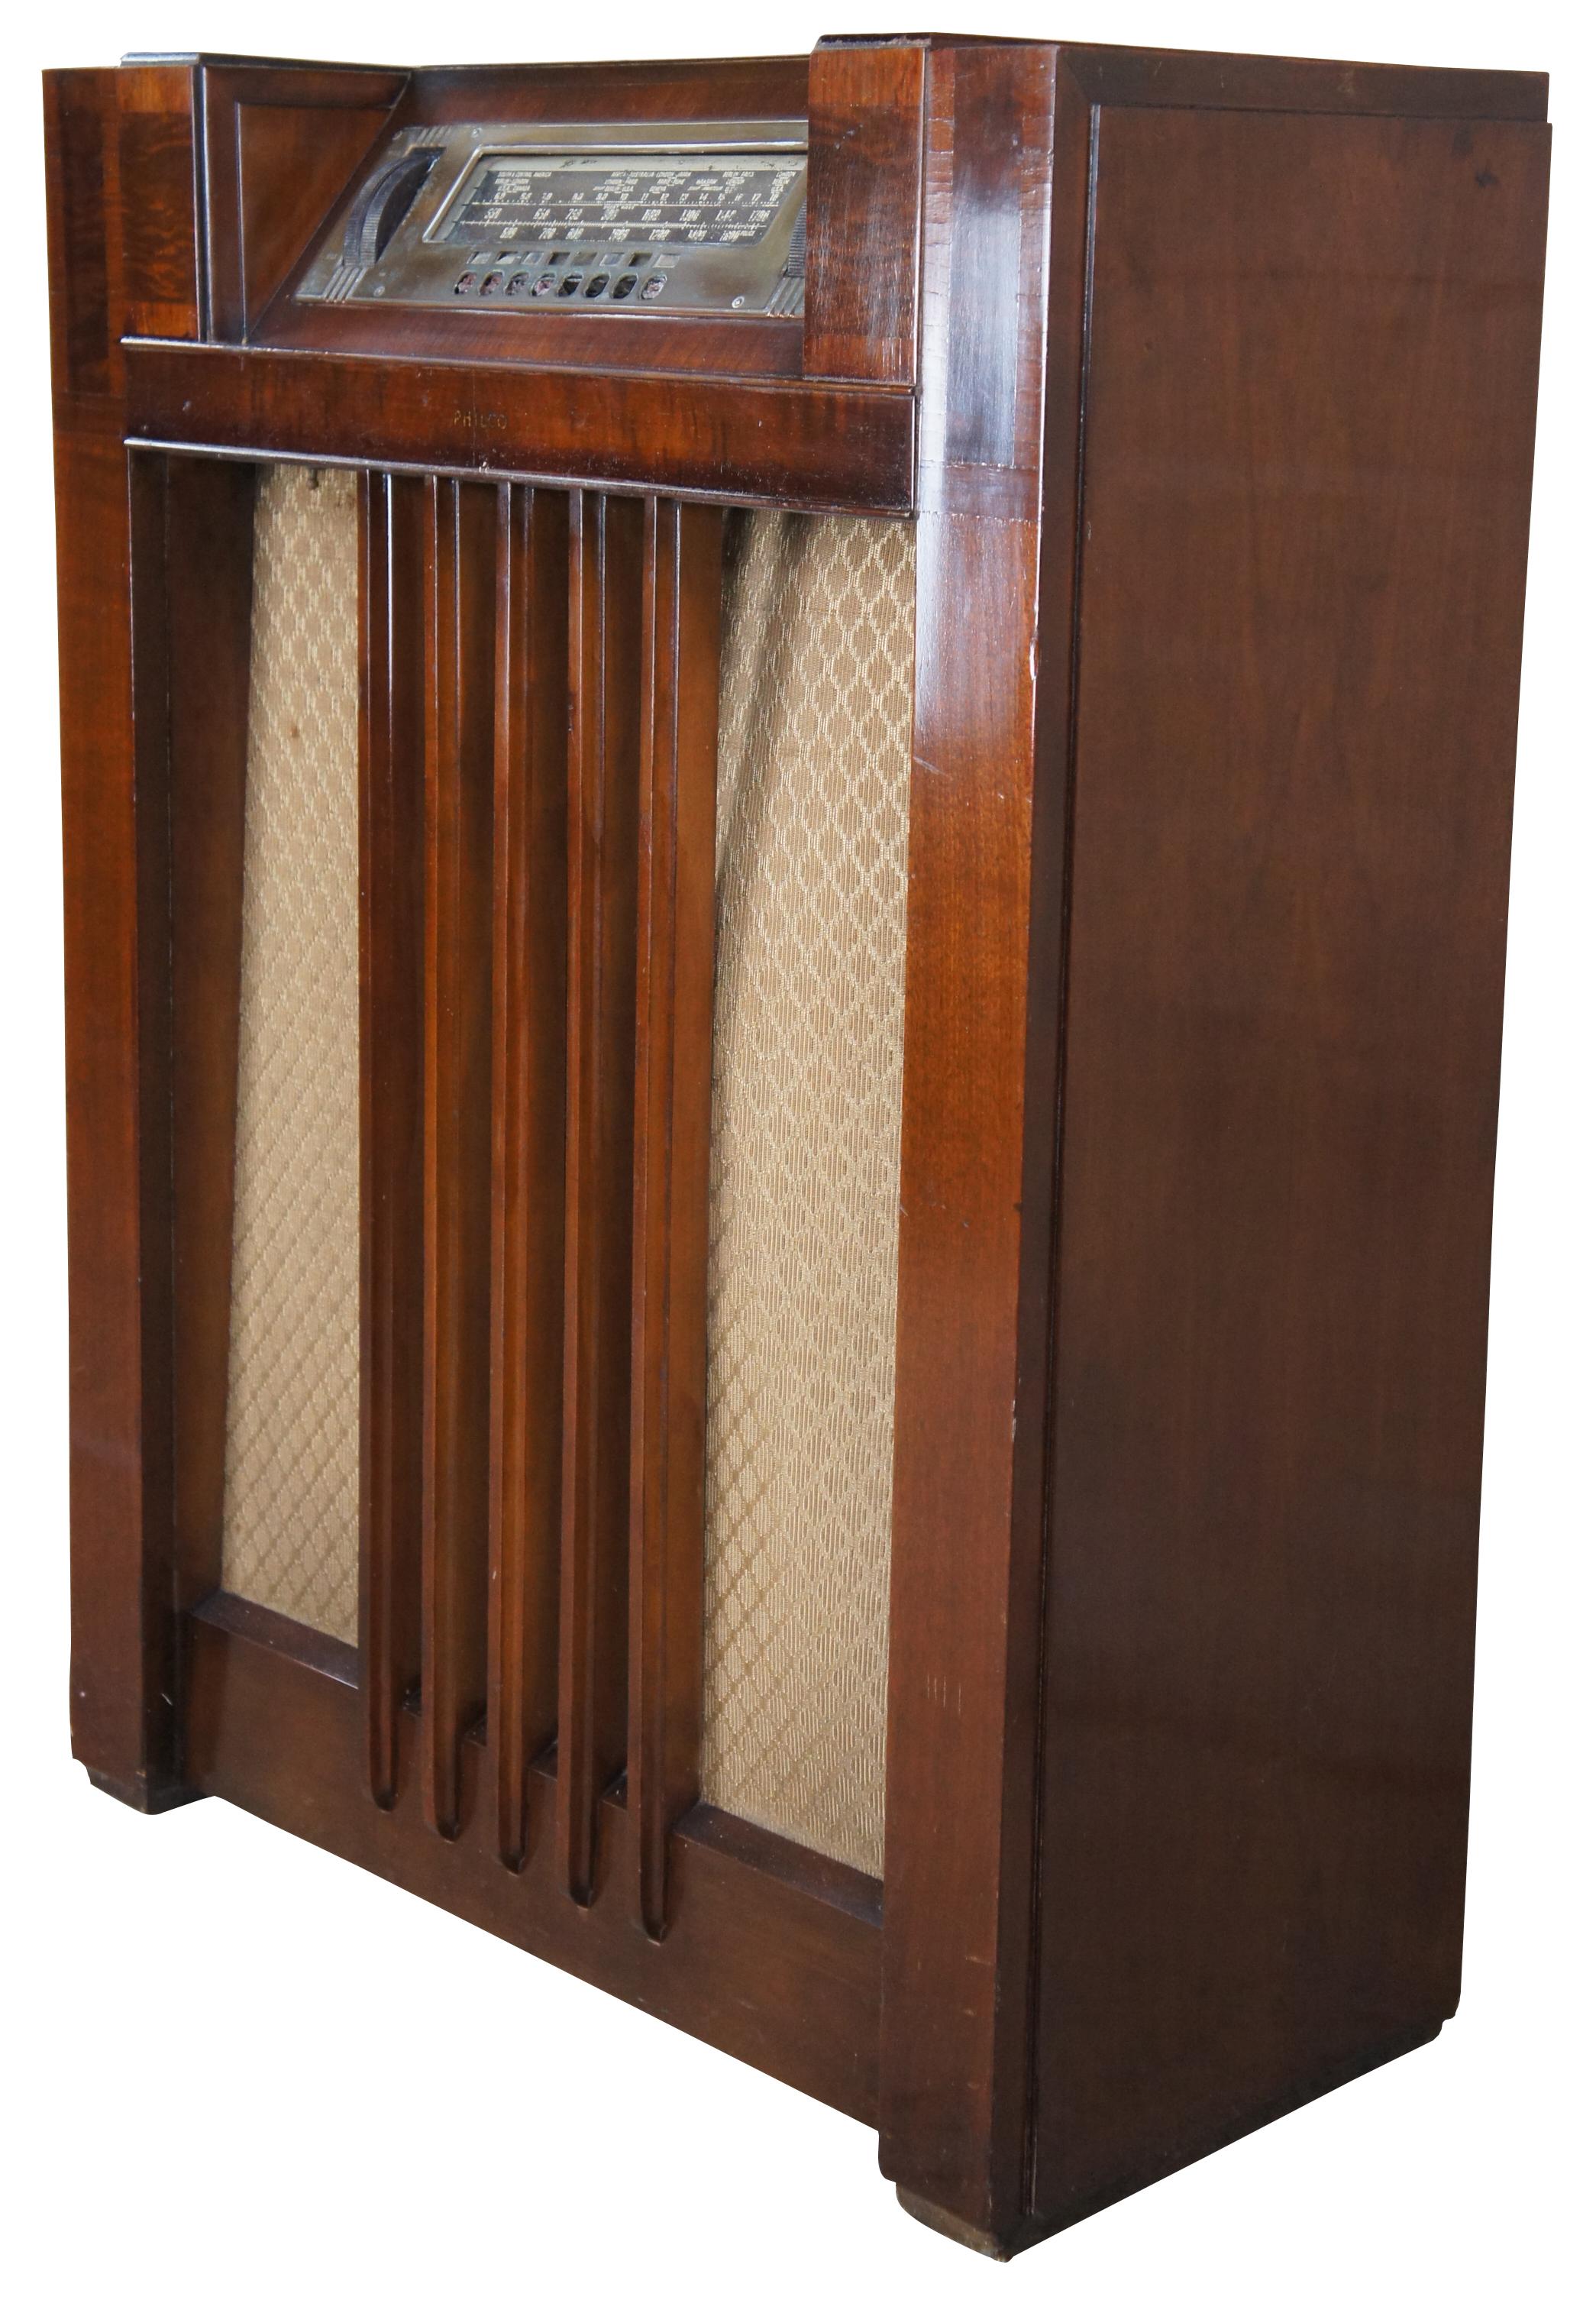 Philco 39-40 tube radio. The last of the pre-war Philcos before they went to the plastic escutcheons and Photofinishes. This set features an all real walnut veneer cabinet with burled highlights and original grille cloth.